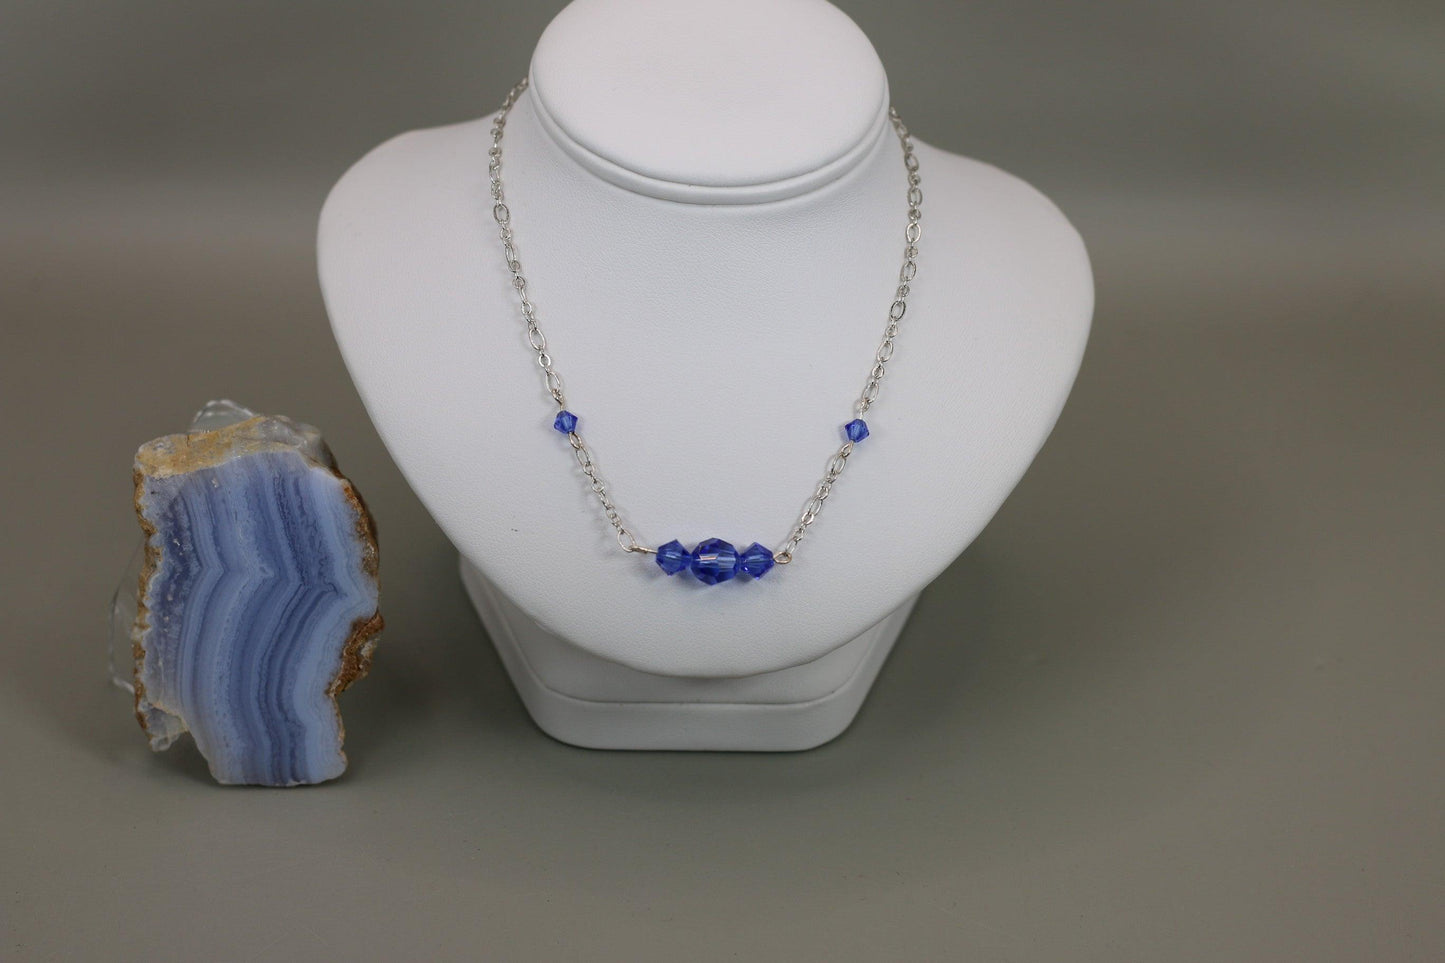 Sapphire Blue Austrian Crystals 18" Figaro Chain Necklace w/Sterling Silver Components - Annabel's Jewelry & Leather